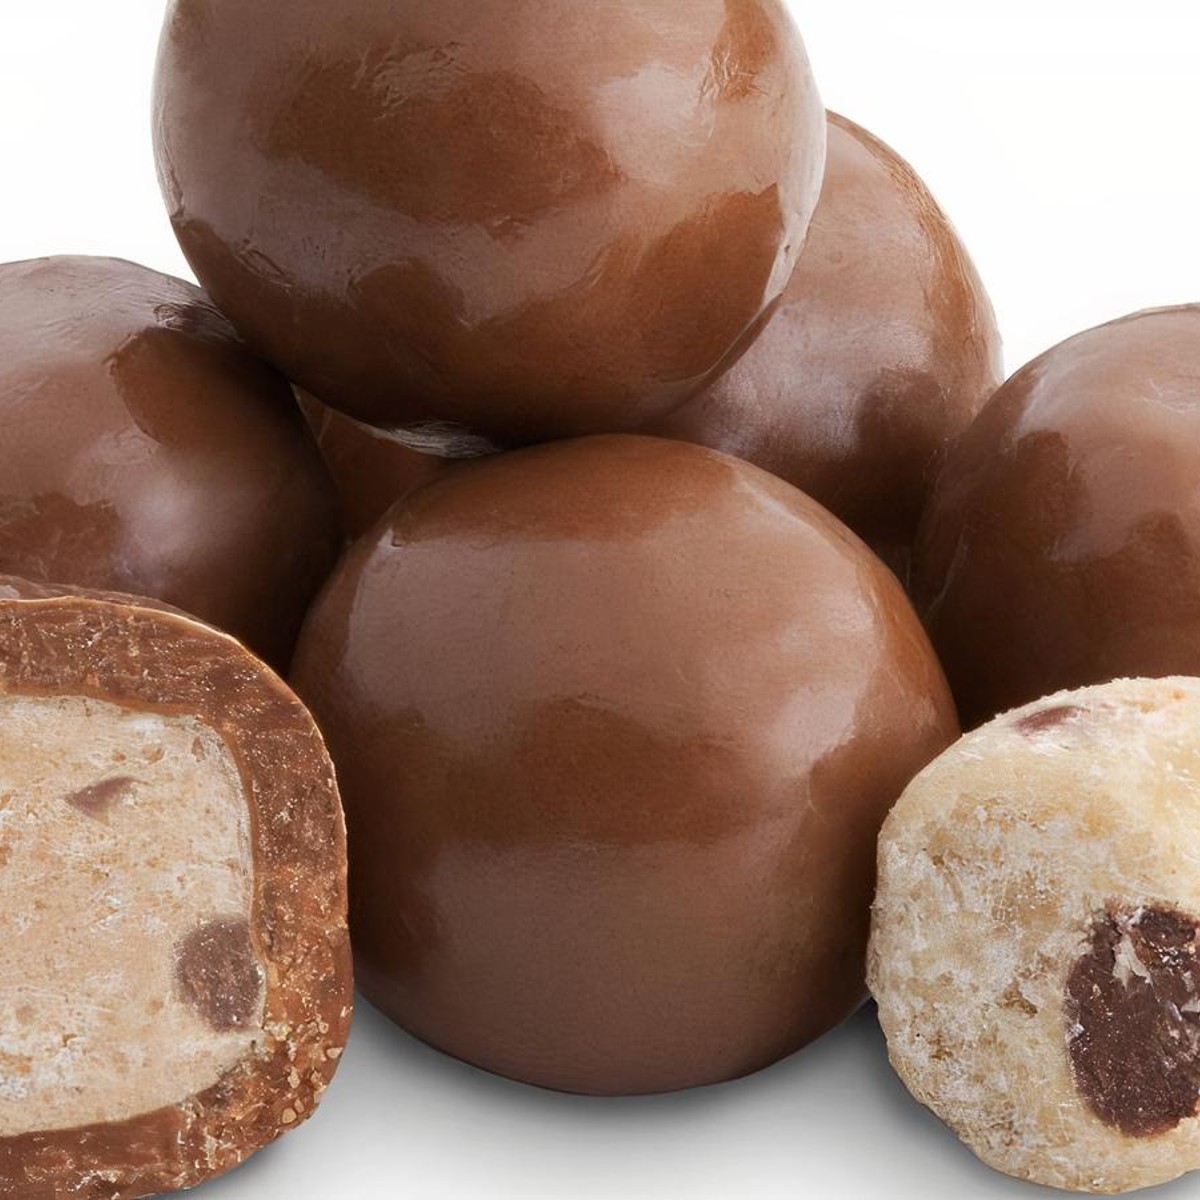 Albanese Milk Chocolate Covered Cookie Dough Bites 10 lb.